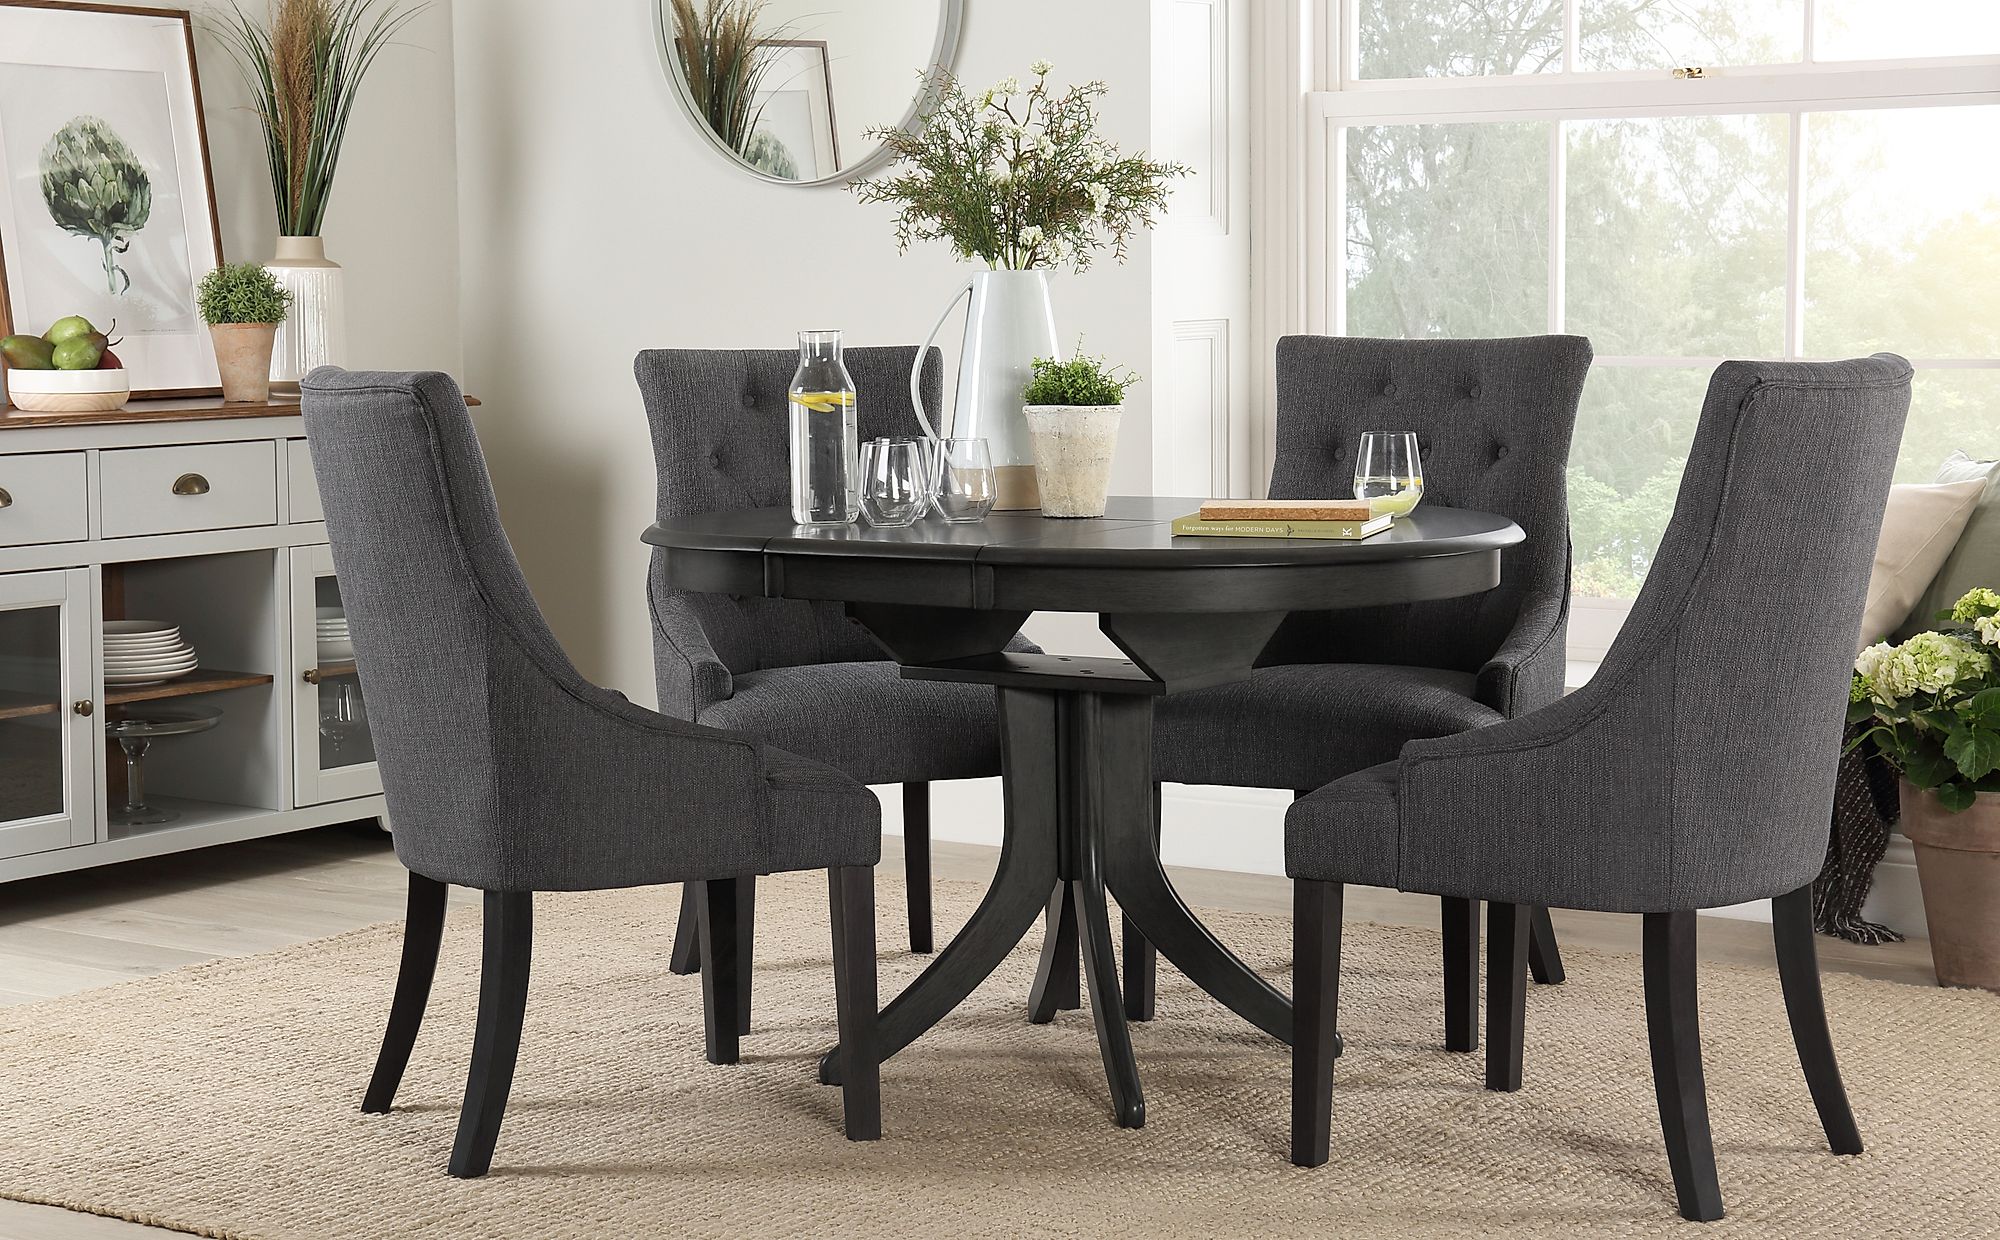 Best Price Extending Dining Room Table